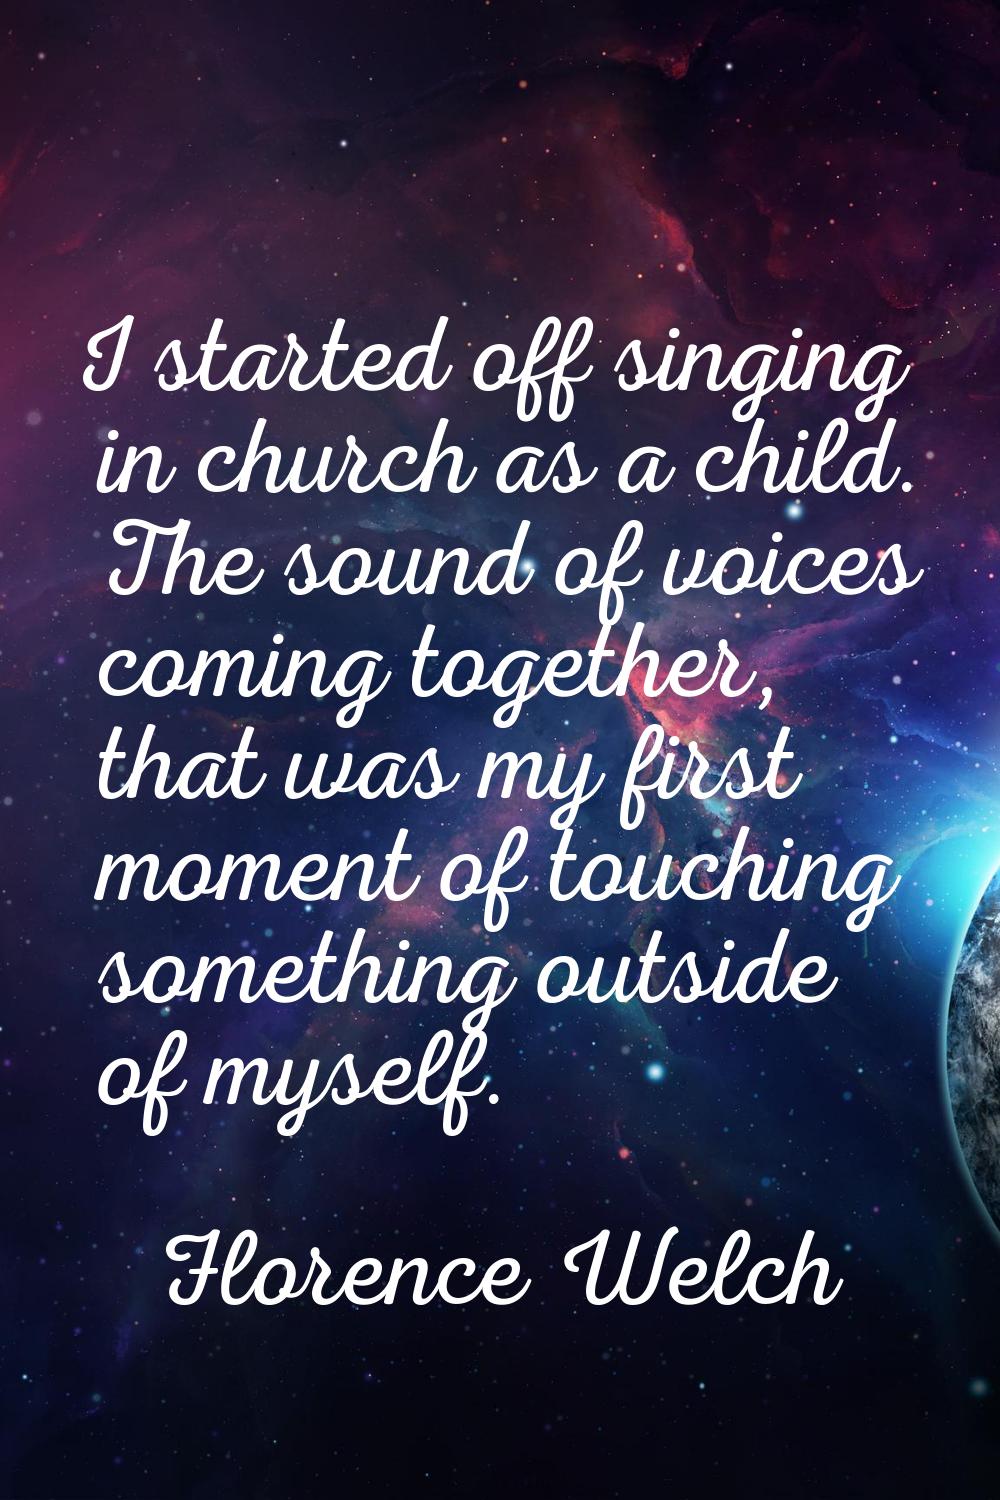 I started off singing in church as a child. The sound of voices coming together, that was my first 